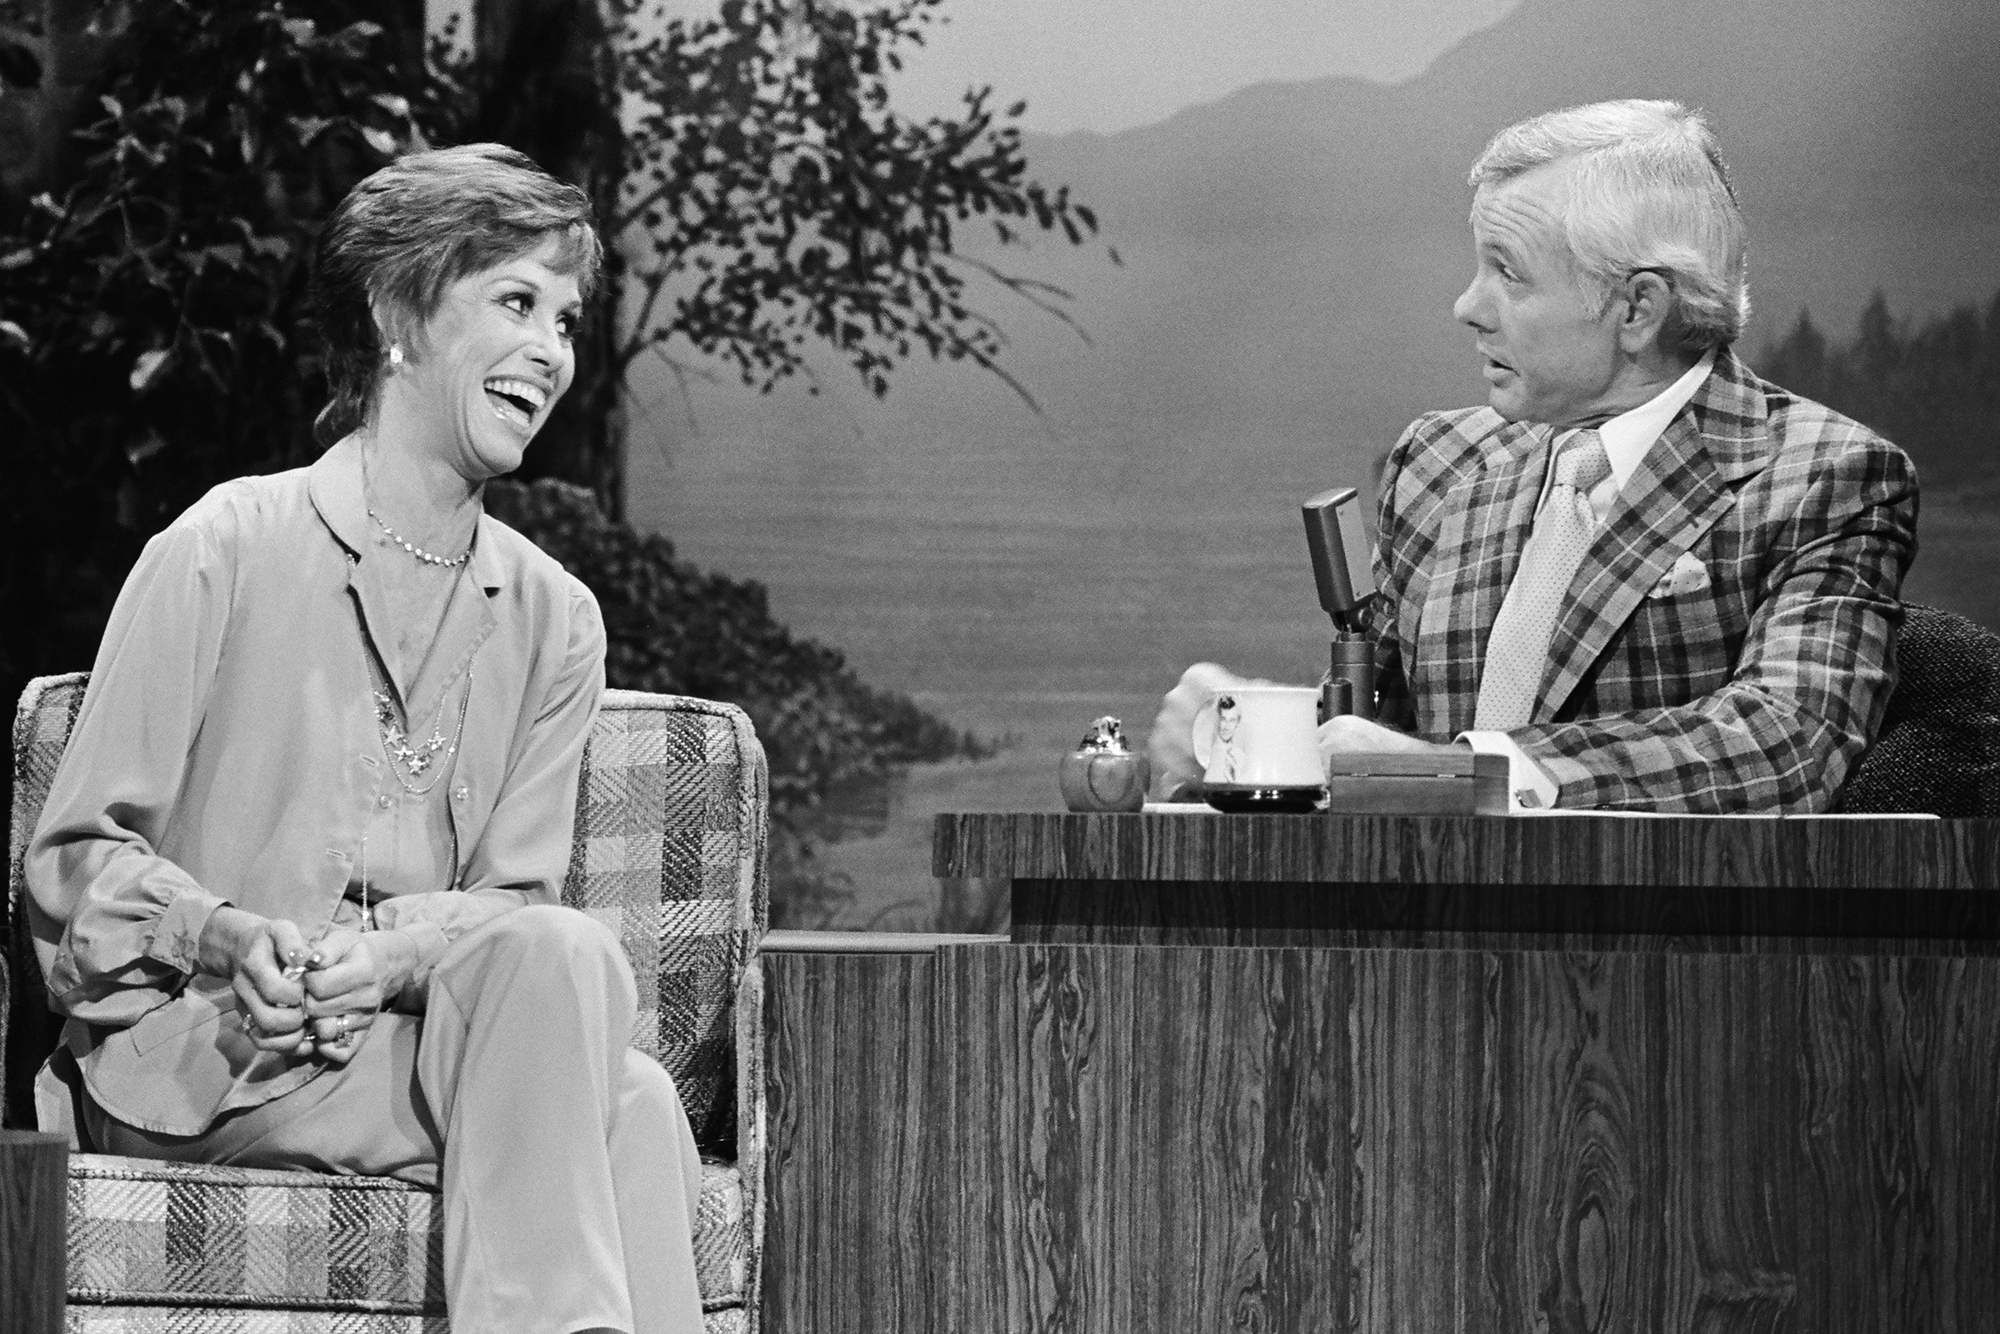 Mary Tyler Moore on The Tonight Show Starring Johnny Carson, on Nov. 3, 1978.